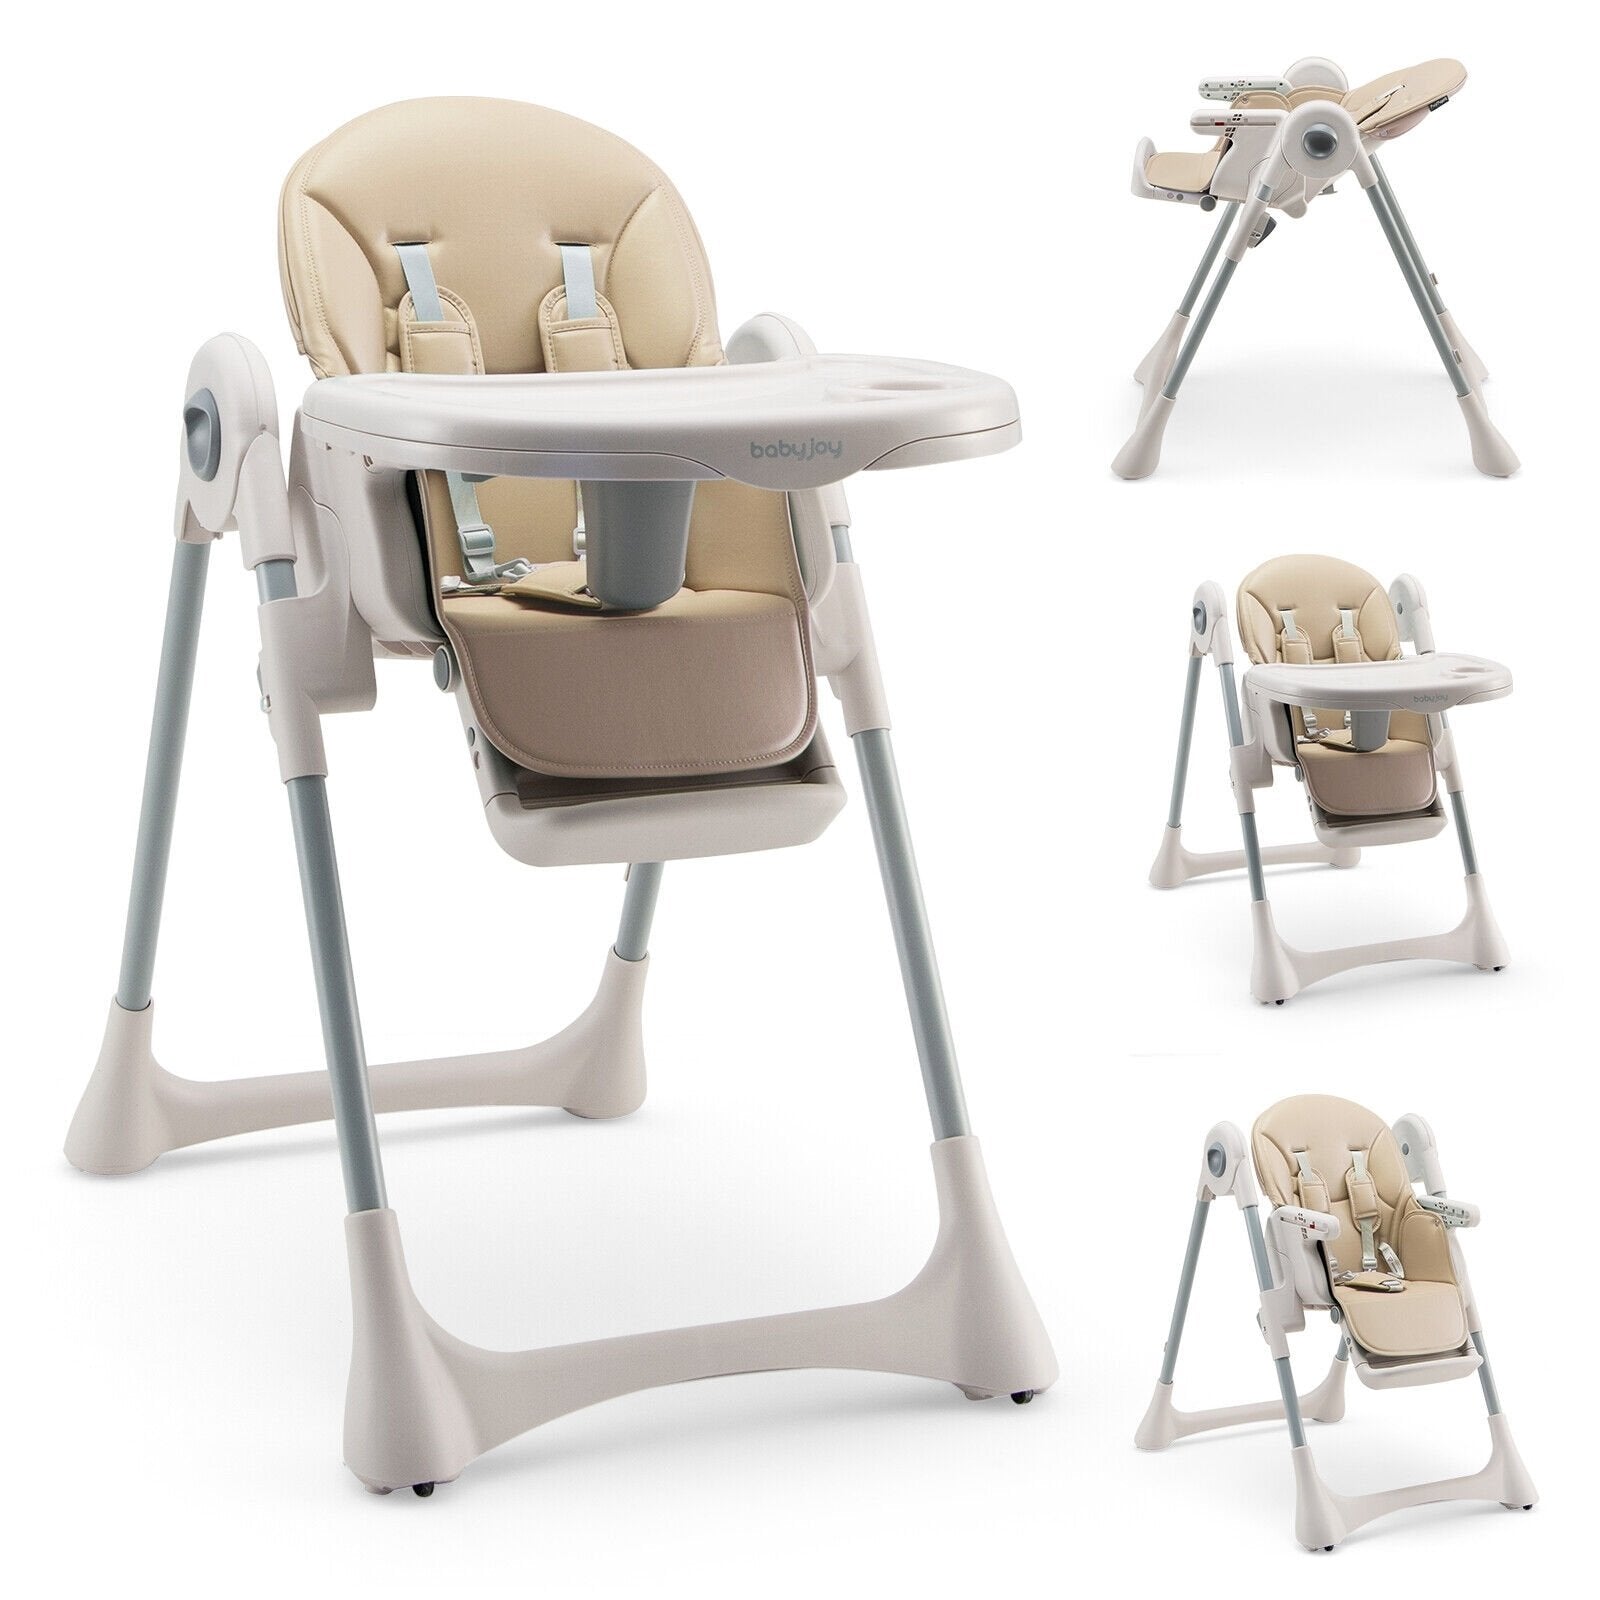 Baby Folding High Chair Dining Chair with Adjustable Height and Footrest, Beige - Gallery Canada